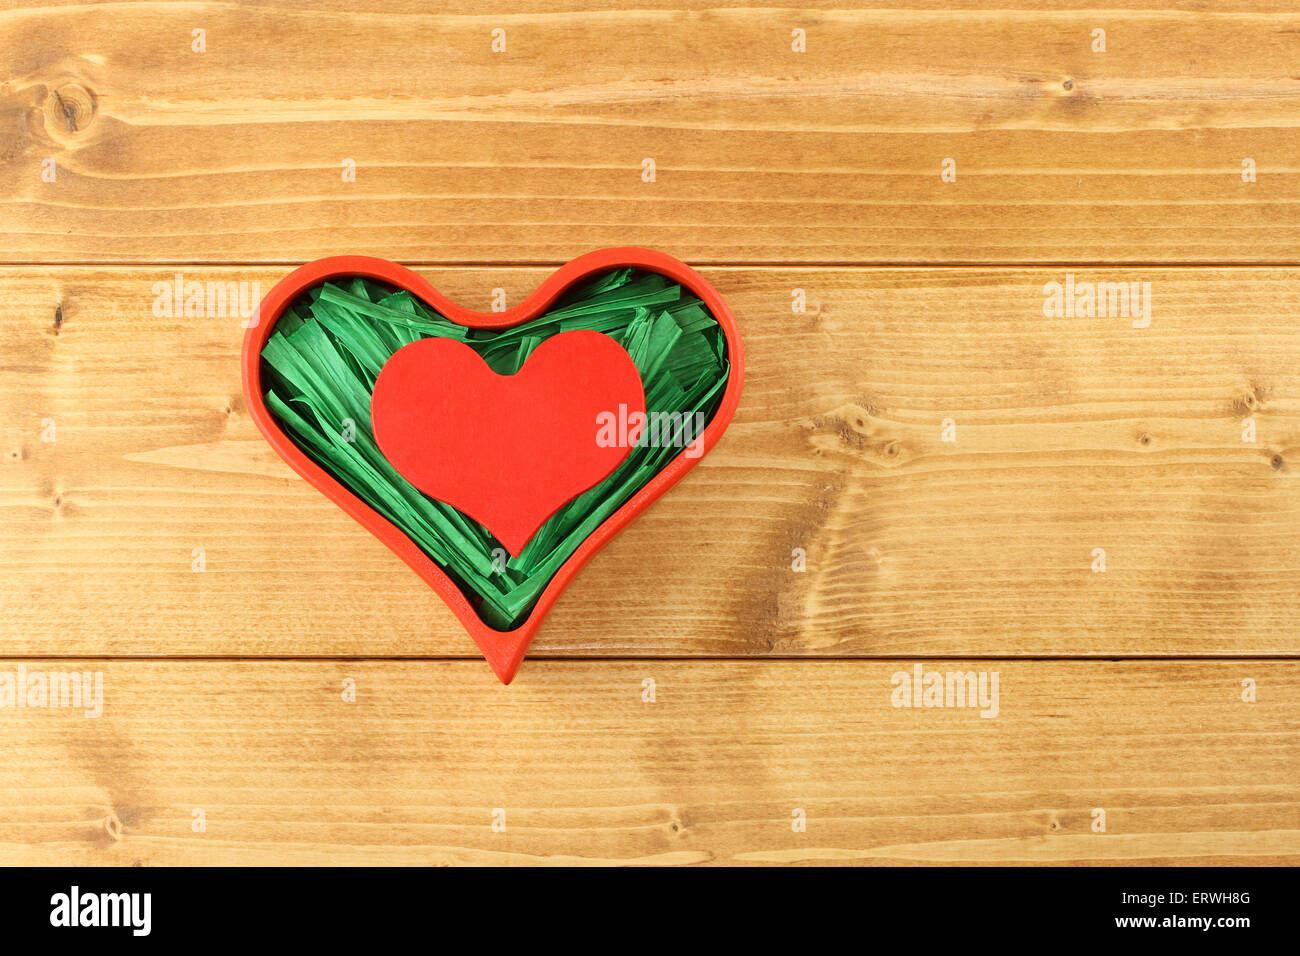 Red painted wooden heart enclosed with green paper raffia strips in red box on wooden background Stock Photo